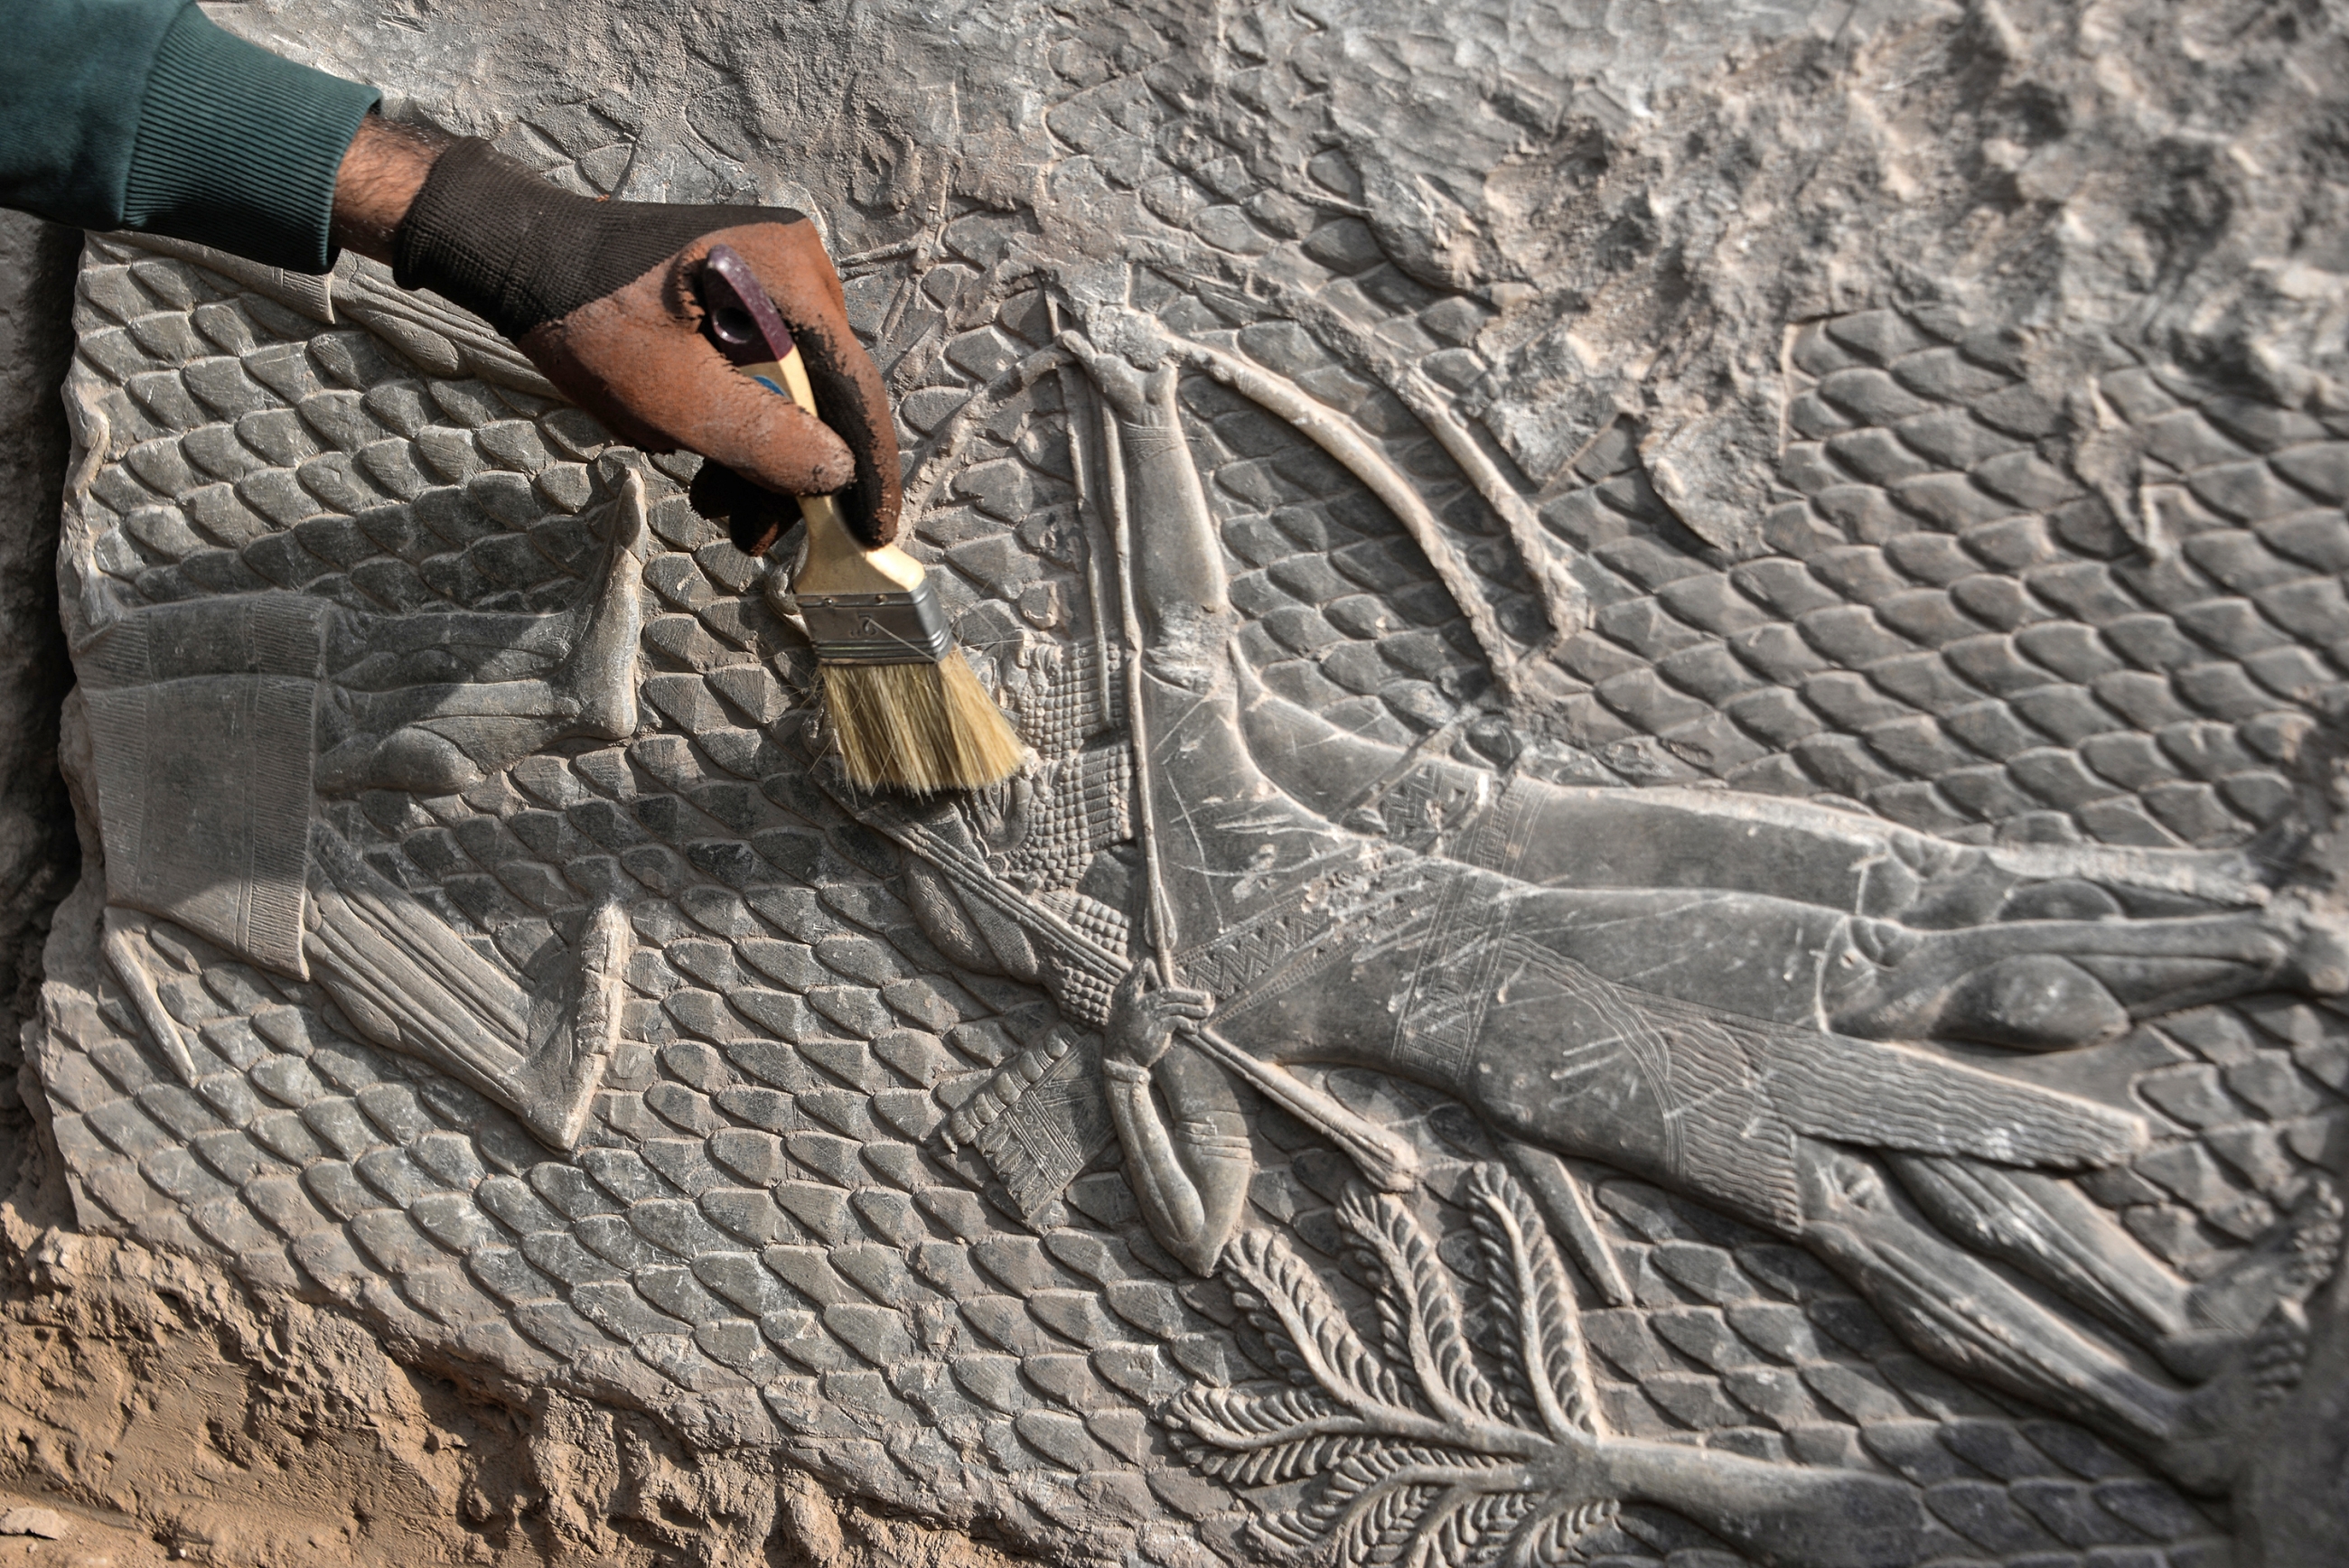 An Iraqi worker excavates a rock-carving relief recently found at the Mashki Gate, one of the monumental gates to the ancient Assyrian city of Nineveh, on the outskirts of what is today the northern Iraqi city of Mosul on October 19, 2022. Zaid AL-OBEIDI / AFP